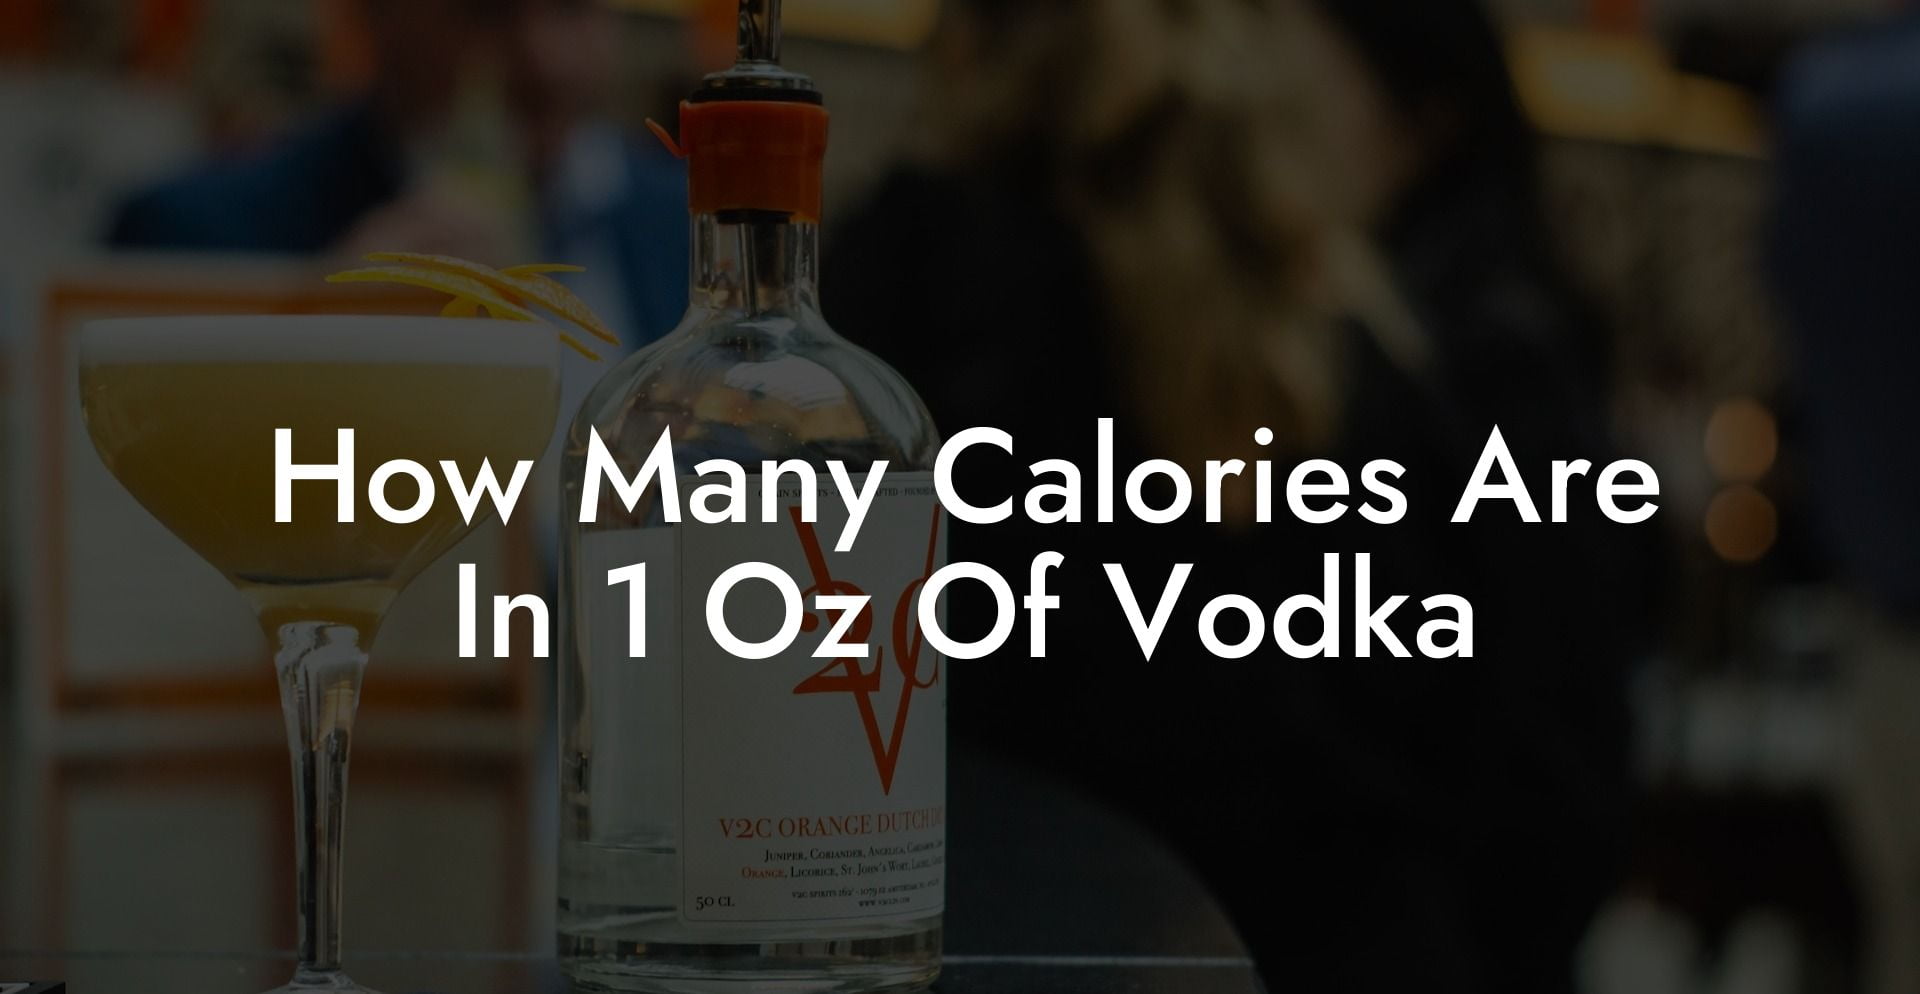 How Many Calories Are In 1 Oz Of Vodka